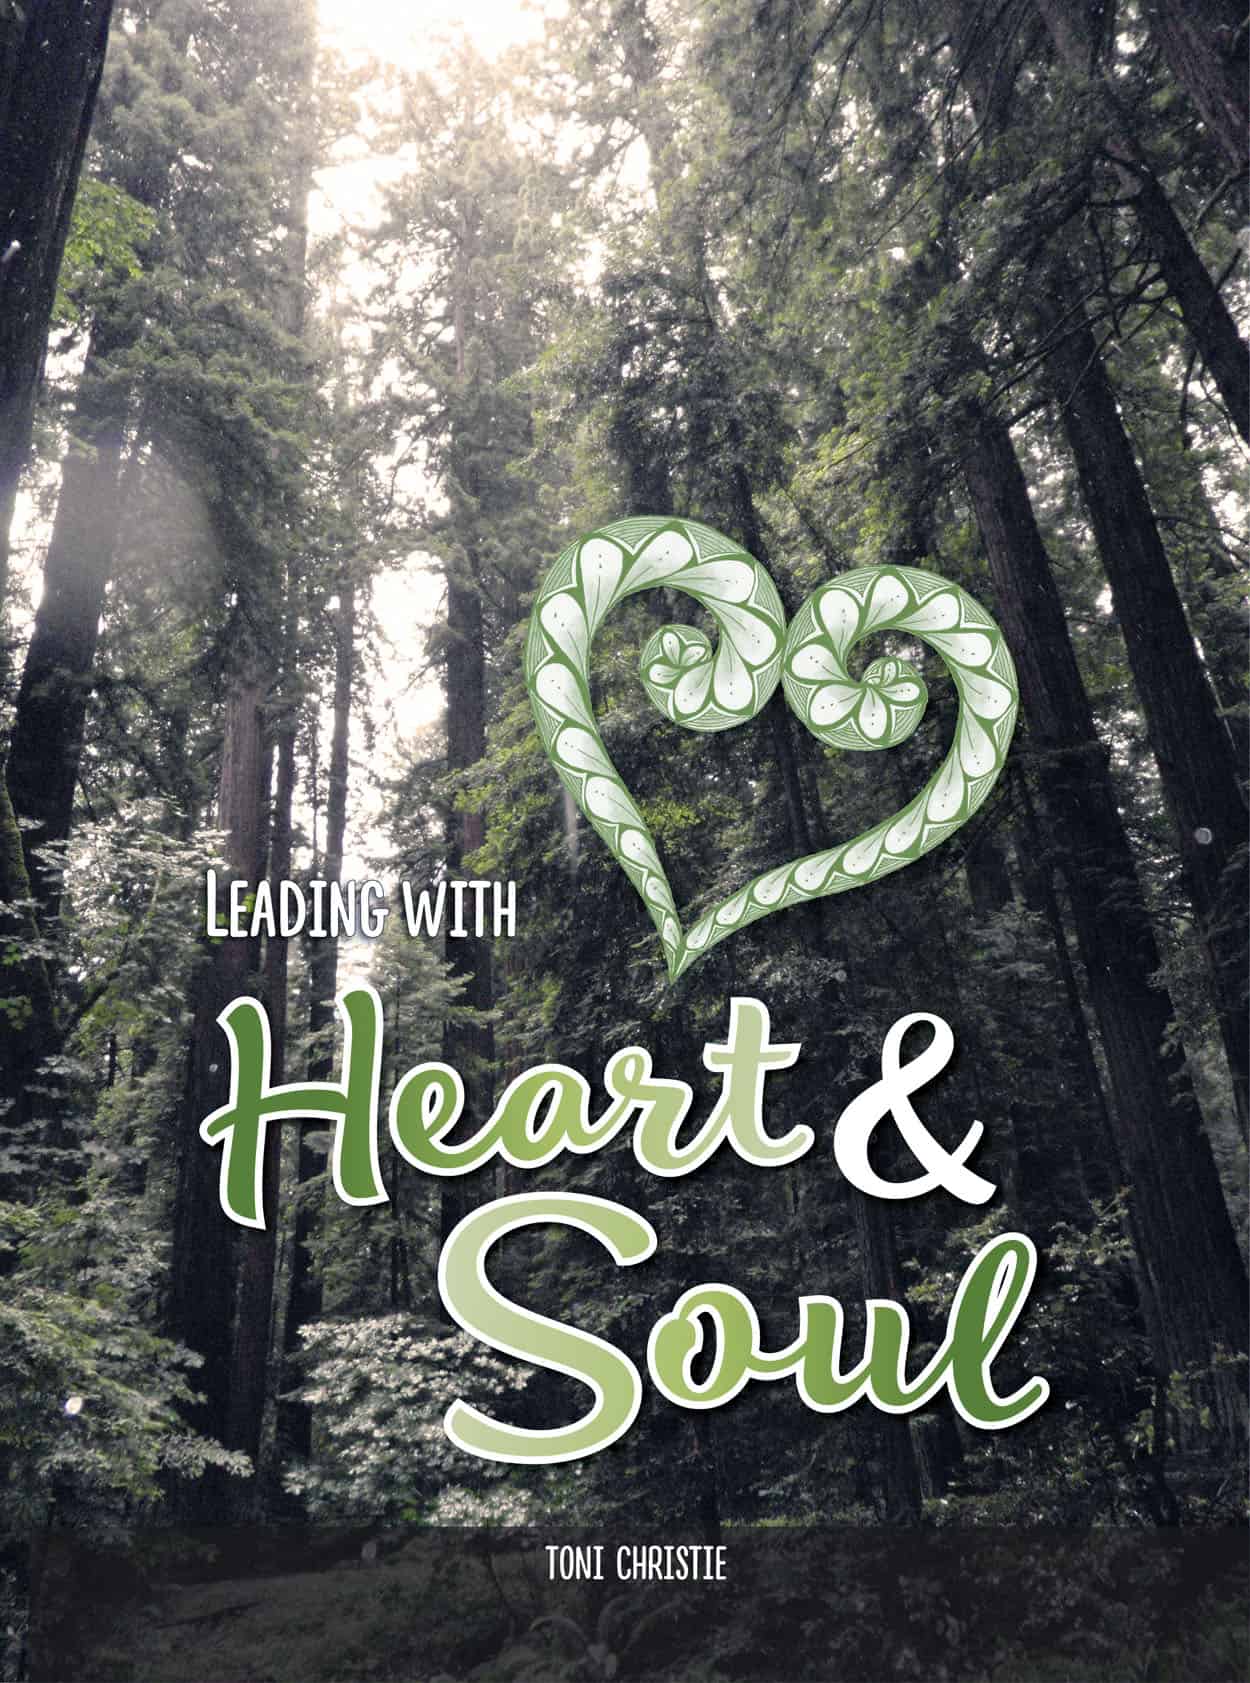 Toni　ECE　Heart　Soul　by　book　for　Christie　teachers　Leading　with